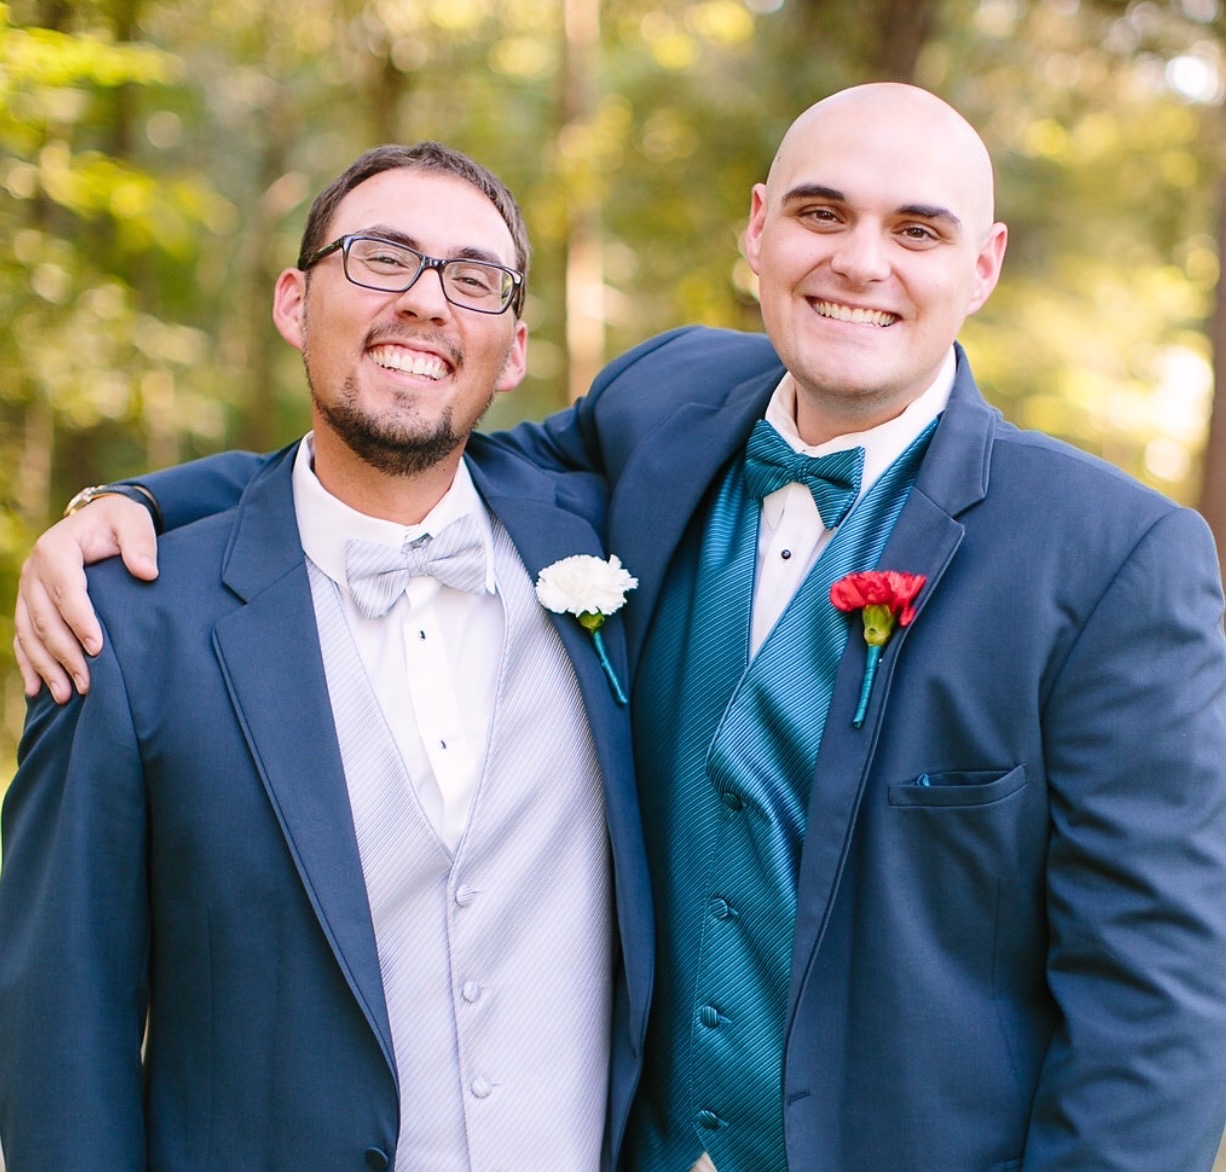 A smiling groom and groomsman embrace 